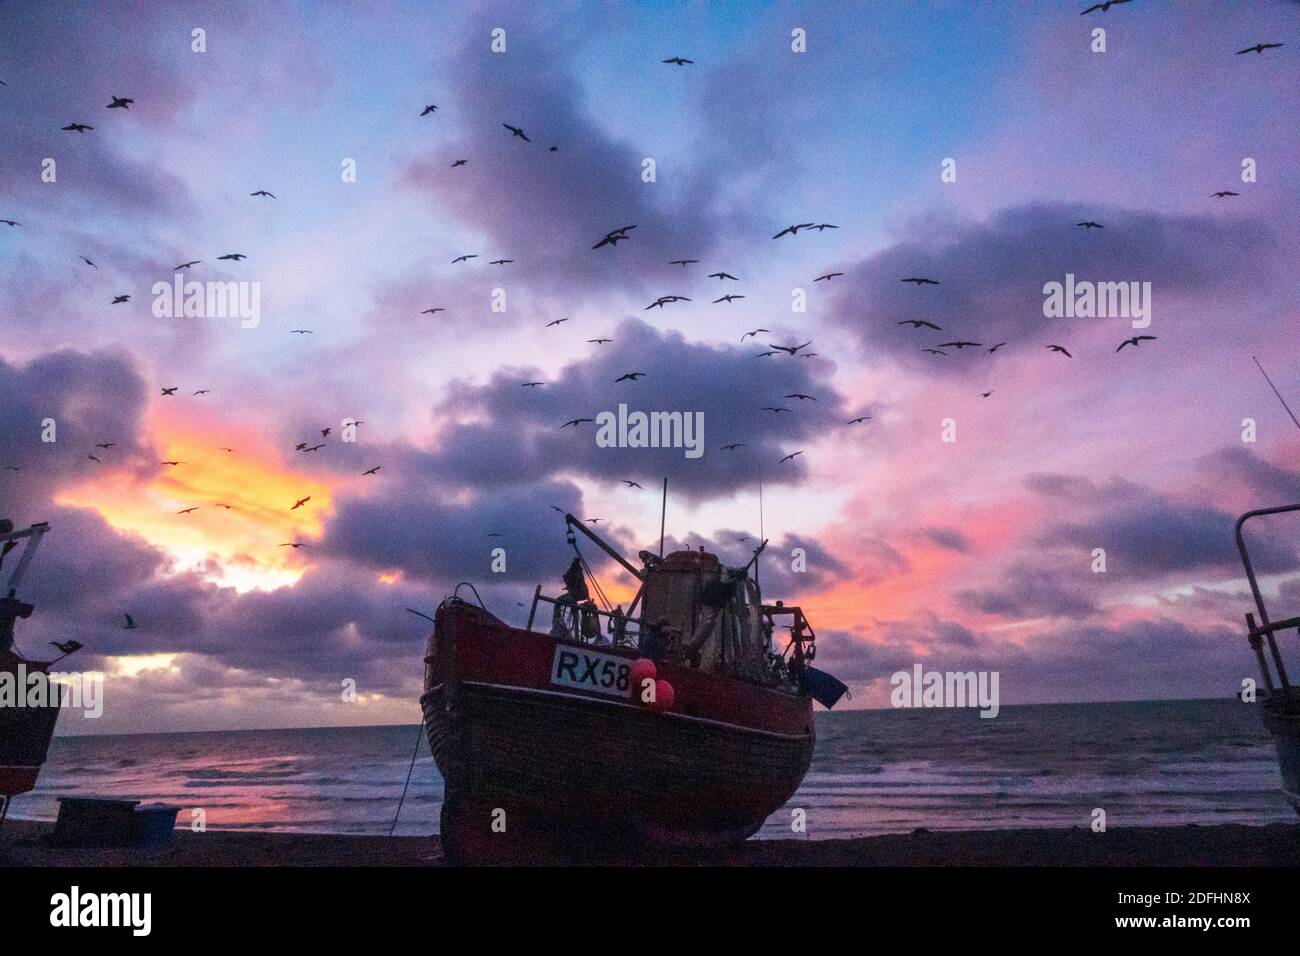 Hastings, East Sussex, UK. 5th December 2020. Seagulls swirl at  dawn over Hastings fishing boats with a colourful sunrise over the English Channel on the day of Boris Johnson's talks with EU President of European Commission, Ursula von der Leyen, to try to break the deadlock over fishing rights in British waters and secure a last minute trade deal. Carolyn Clarke/Alamy Live News. Winter sunrise. Brexit Stock Photo